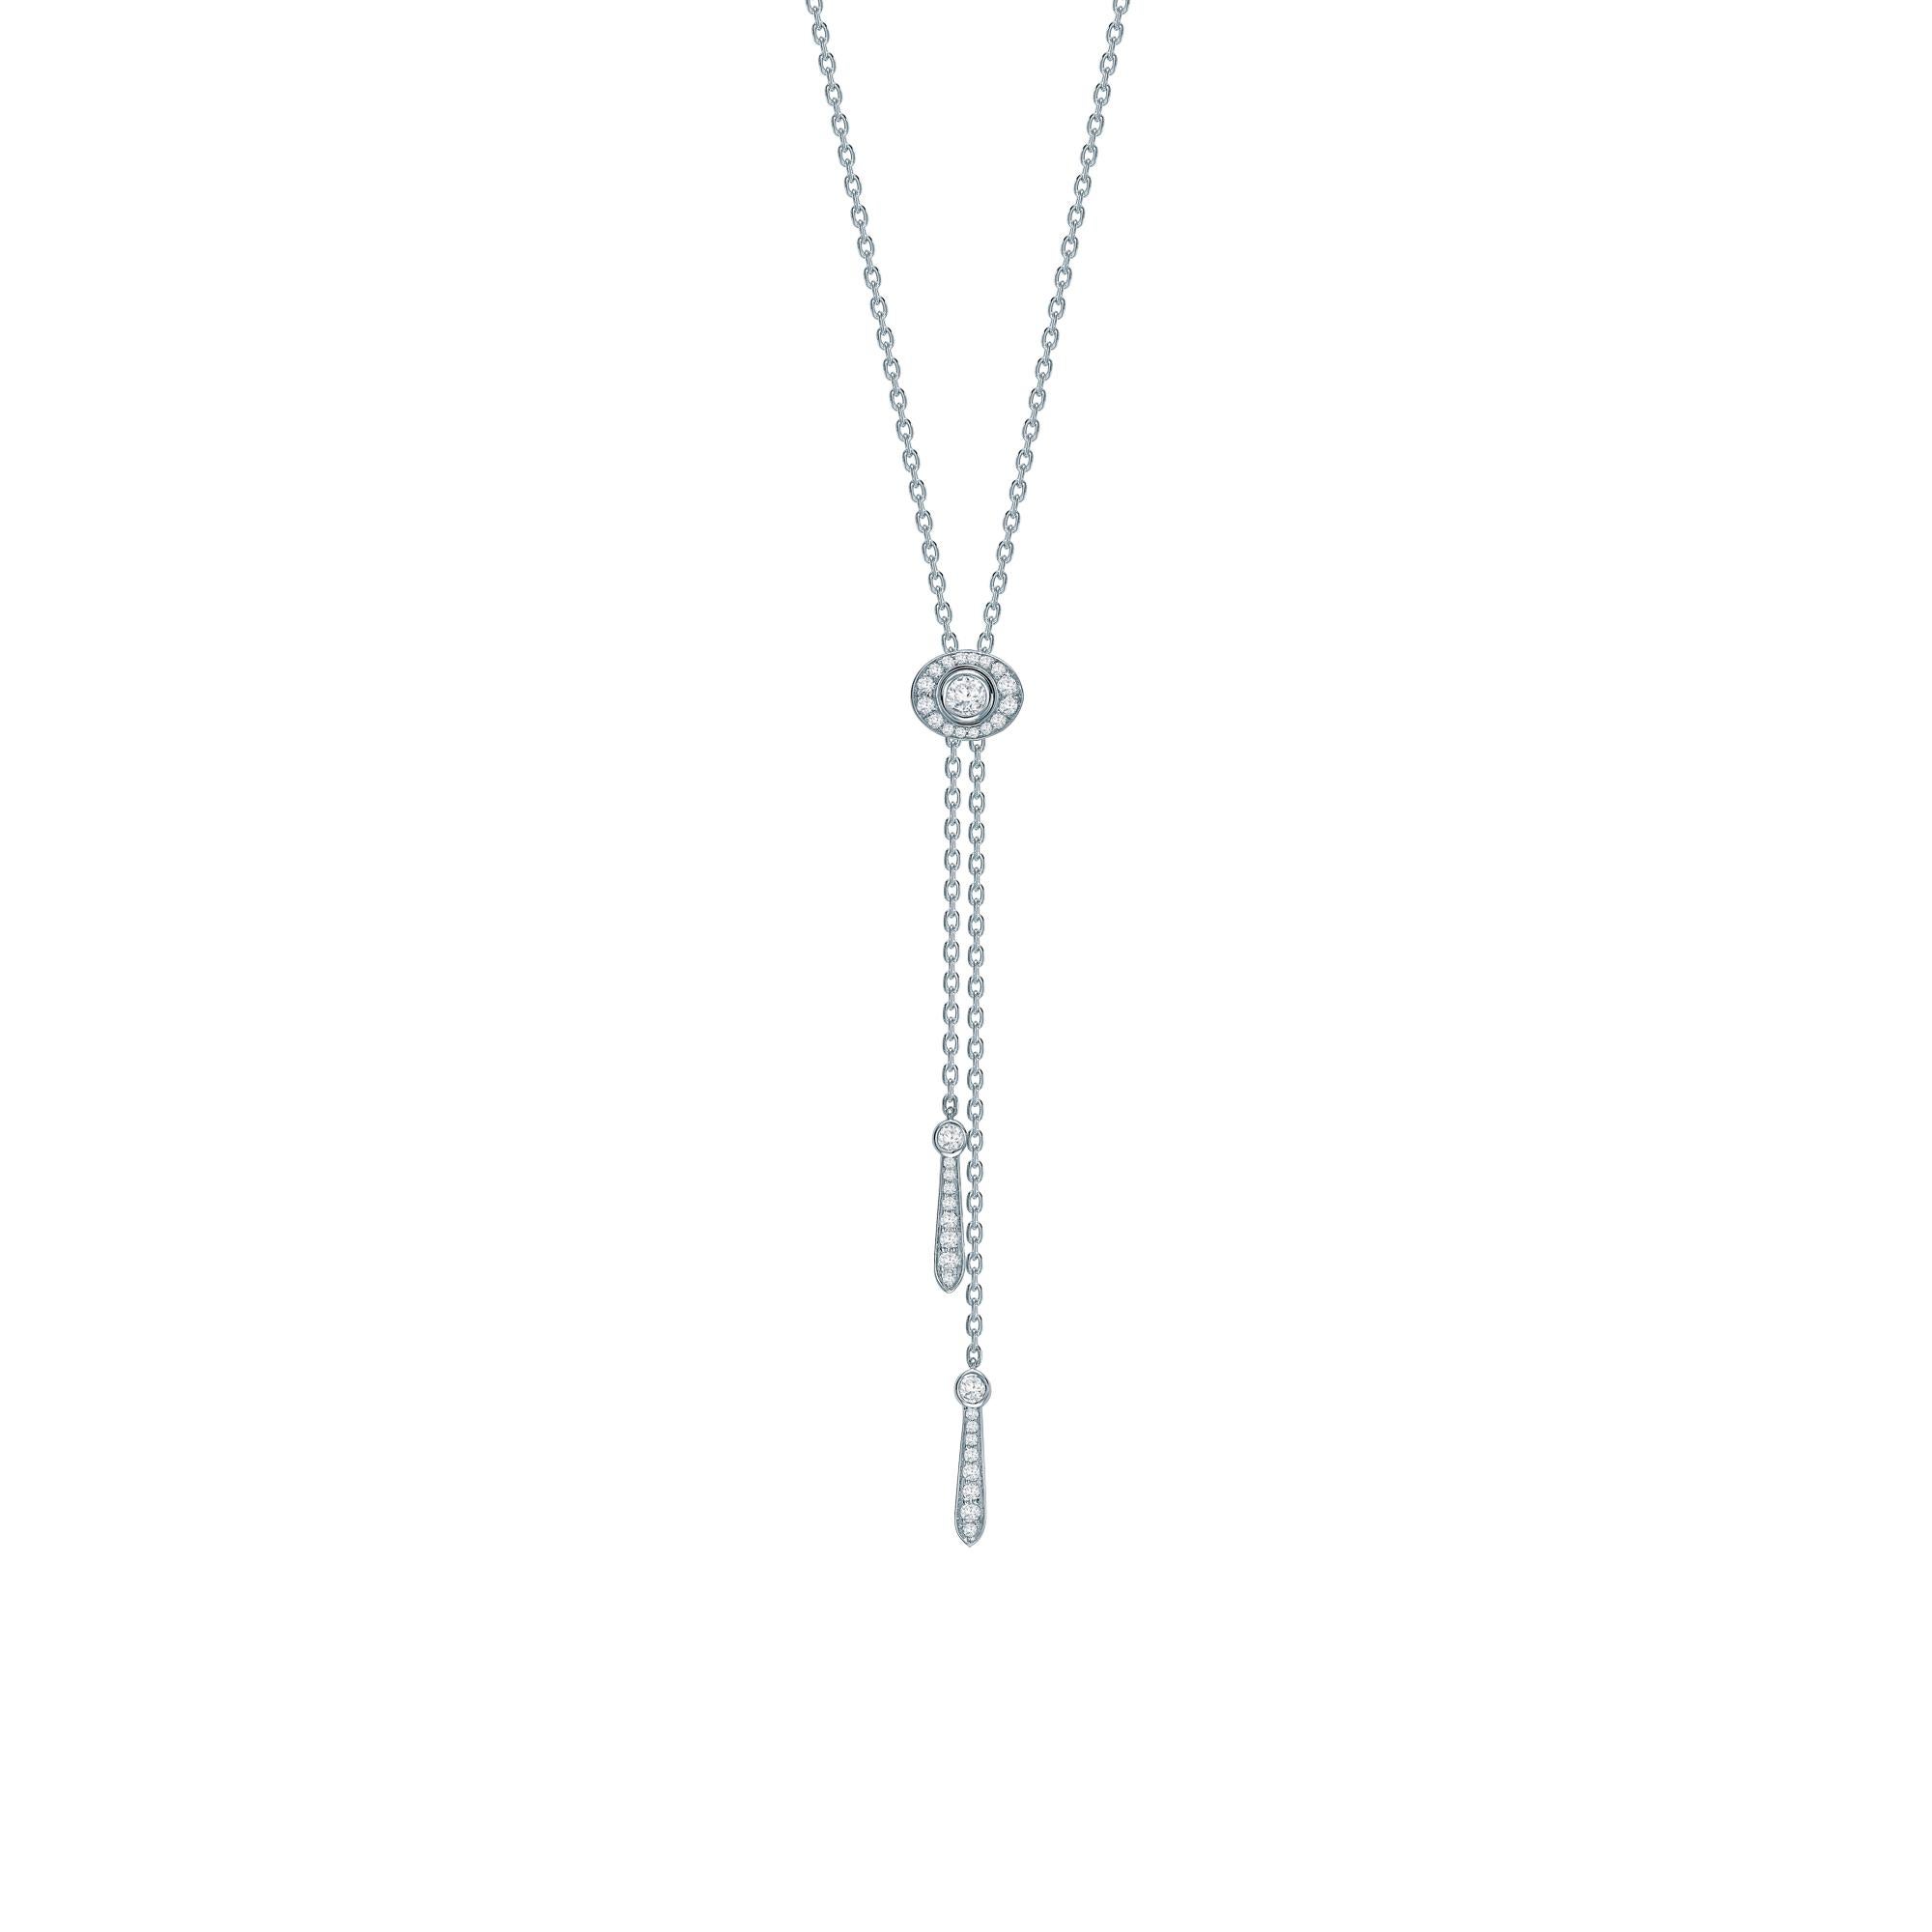 An 18 karat white gold pendant from The House of Garrard Wings Embrace collection set with 180 round white diamonds weighing 2.35 carats. The pendant has a total length of 65cm and features an adjustable slider allowing it to be worn at different